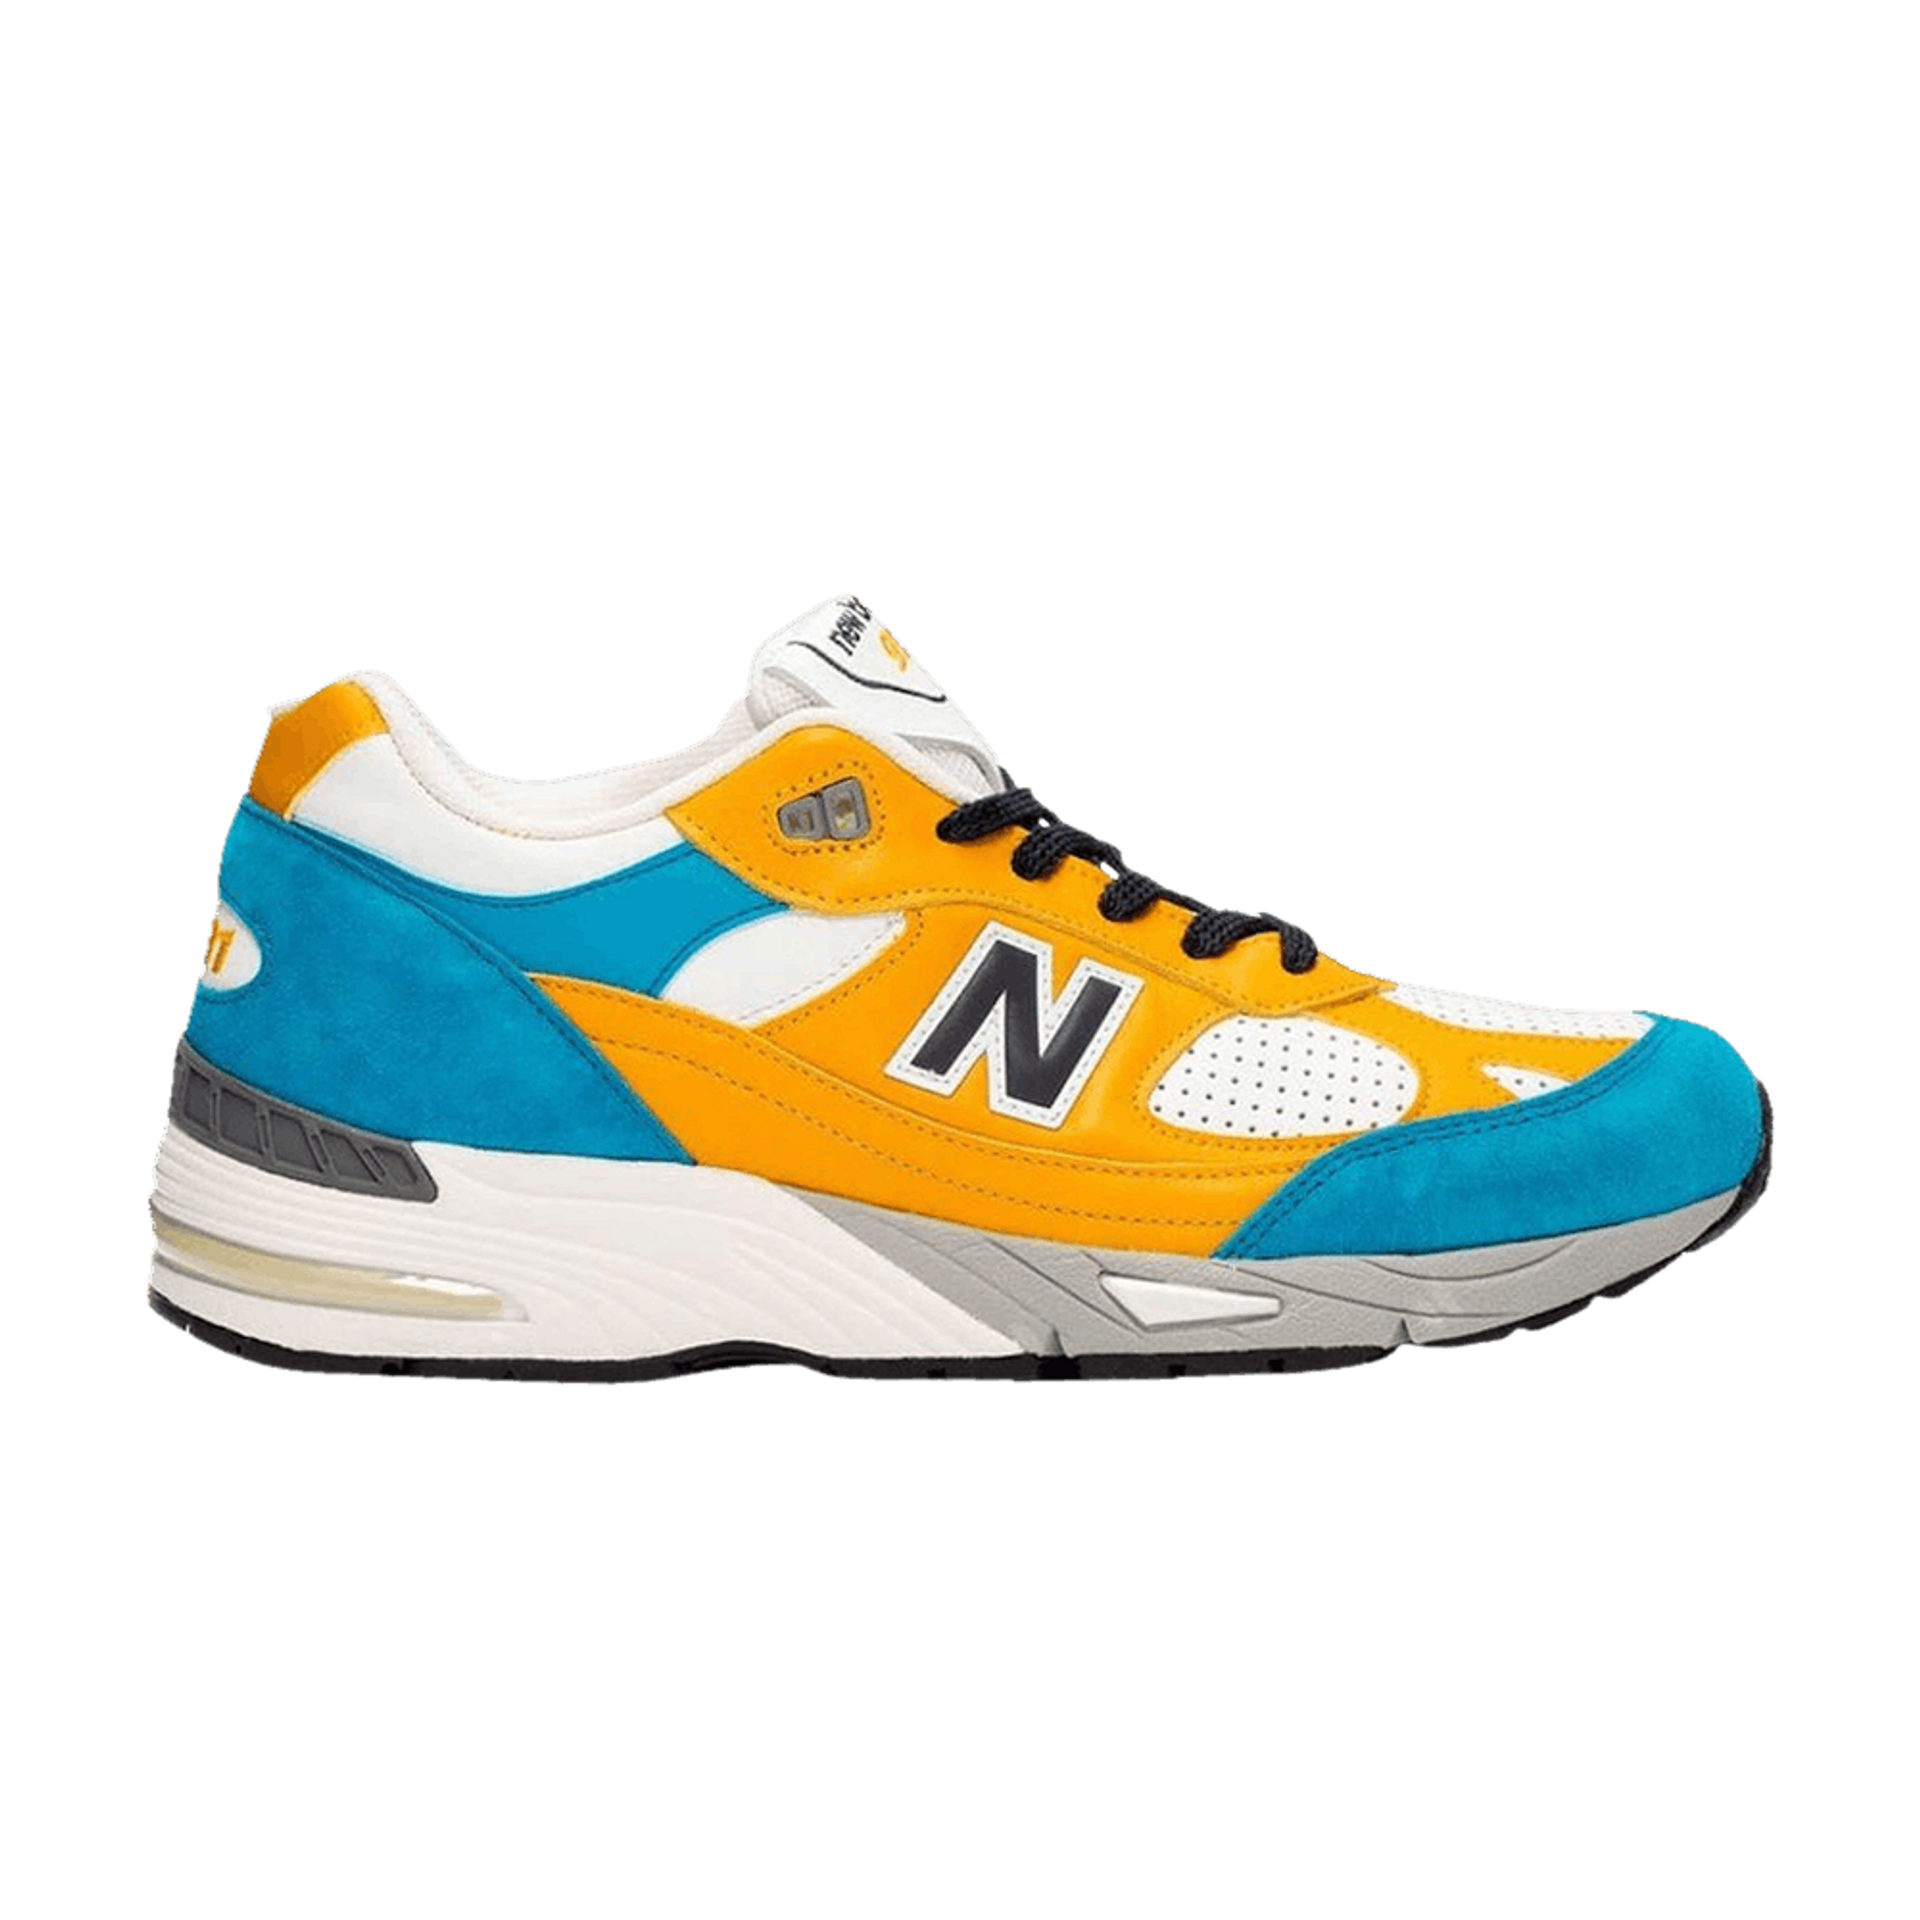 New Balance Sneakersnstuff x 991 Made in England 'Blue Yellow'